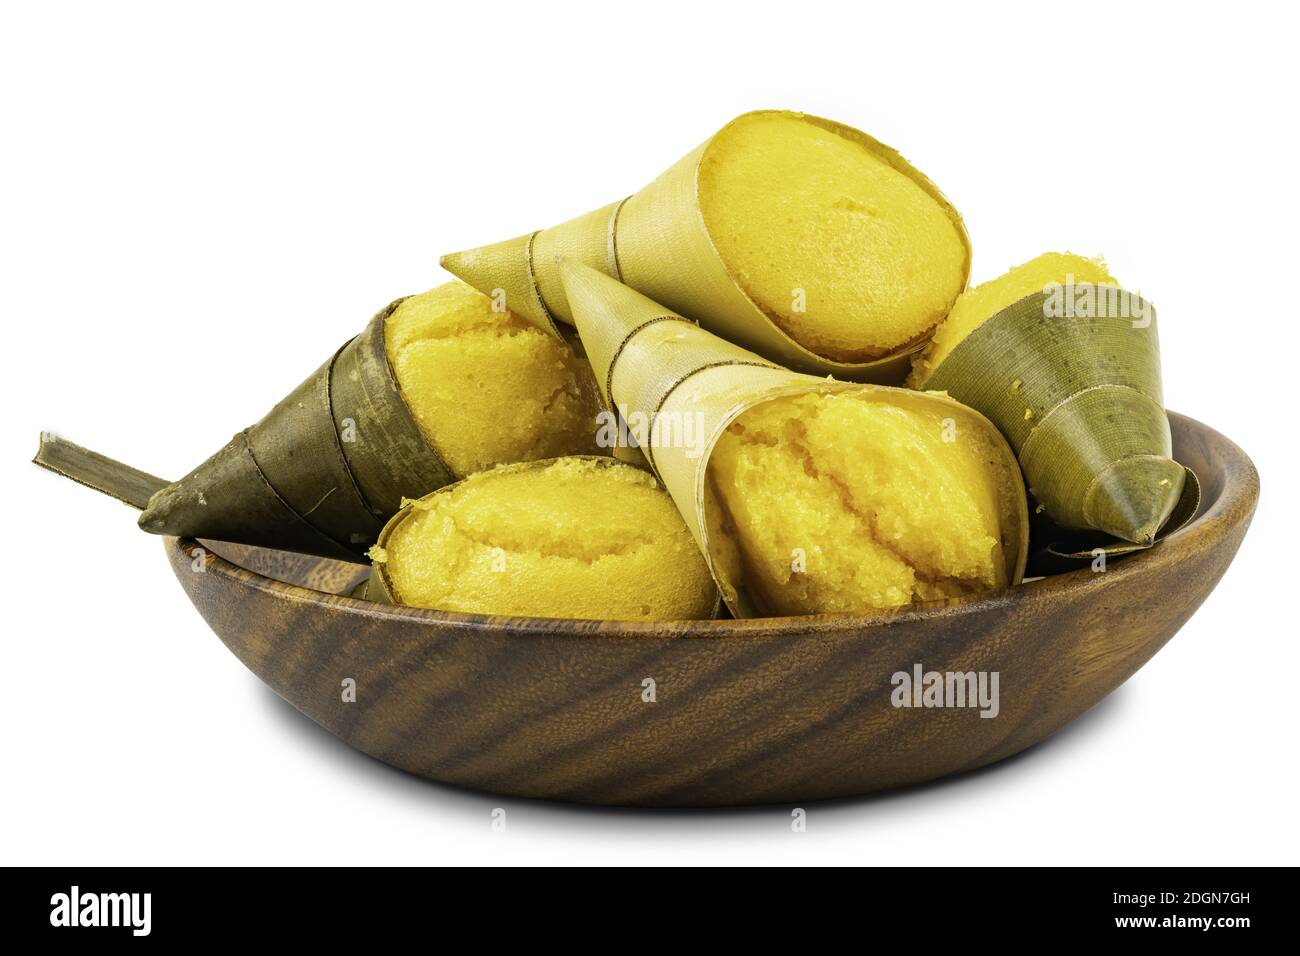 Pile of Toddy Palm Cake or Kanom Tarn, the local Thai dessert in wooden bowl Stock Photo